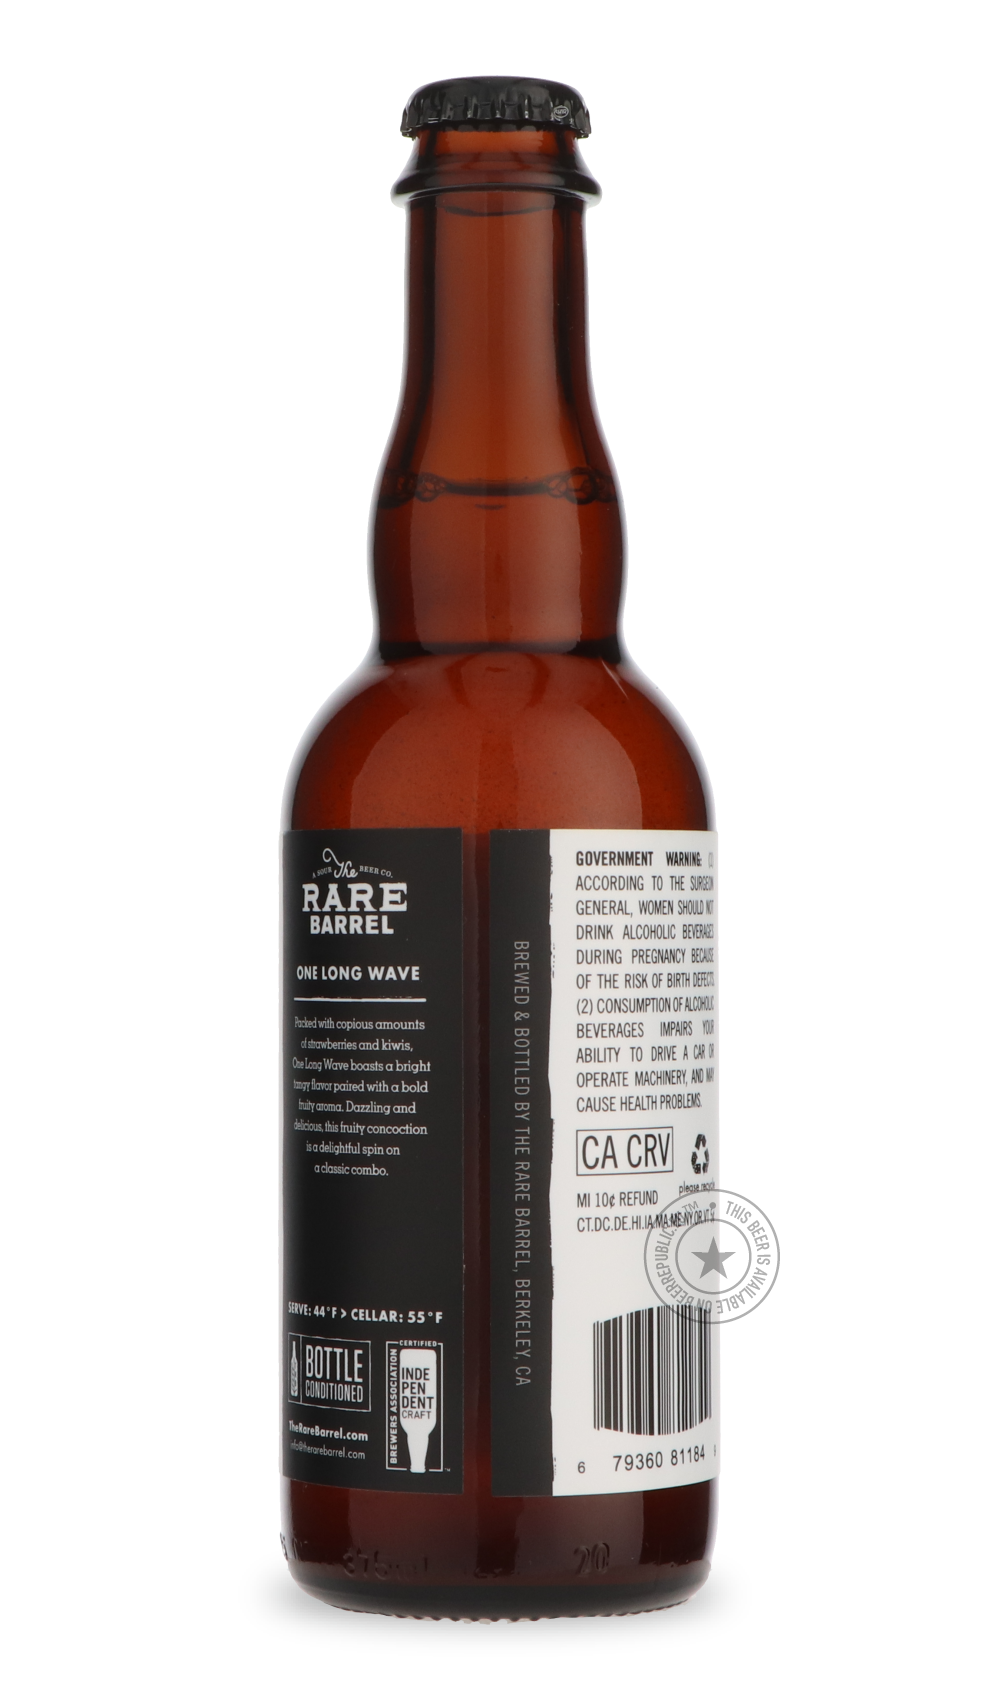 -The Rare Barrel- One Long Wave 2021-Sour / Wild & Fruity- Only @ Beer Republic - The best online beer store for American & Canadian craft beer - Buy beer online from the USA and Canada - Bier online kopen - Amerikaans bier kopen - Craft beer store - Craft beer kopen - Amerikanisch bier kaufen - Bier online kaufen - Acheter biere online - IPA - Stout - Porter - New England IPA - Hazy IPA - Imperial Stout - Barrel Aged - Barrel Aged Imperial Stout - Brown - Dark beer - Blond - Blonde - Pilsner - Lager - Whea